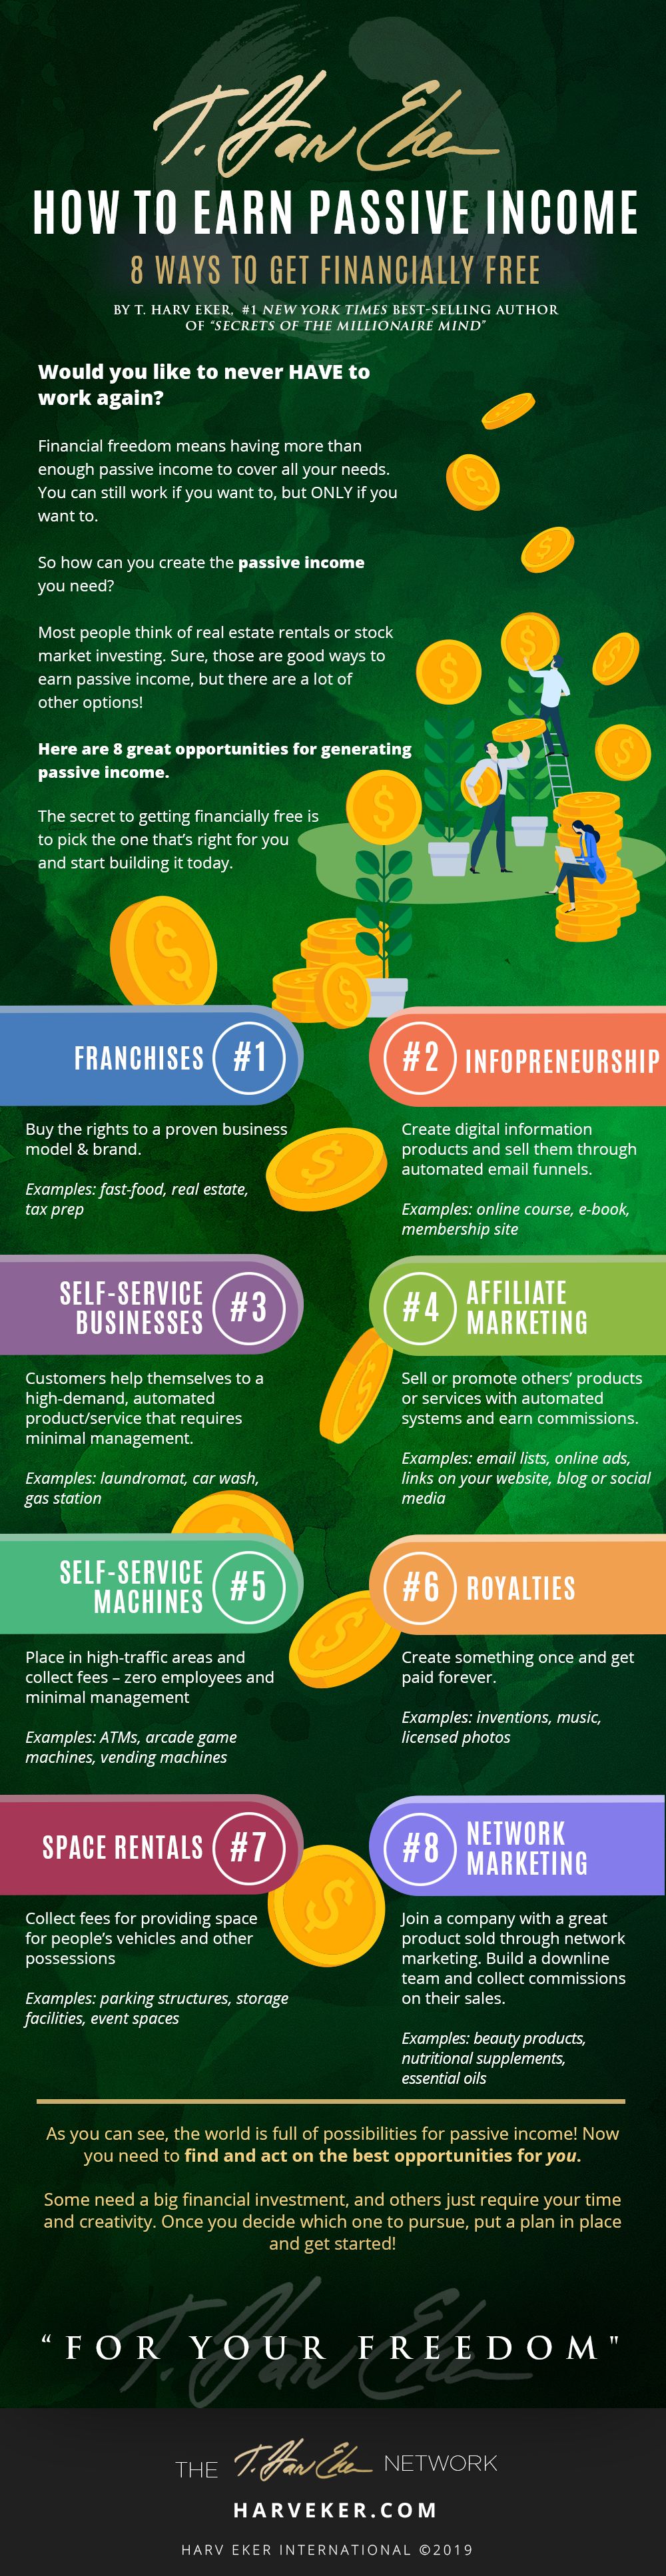 How To Earn Passive Income: 8 Ways To Get Financially Free [Infographic